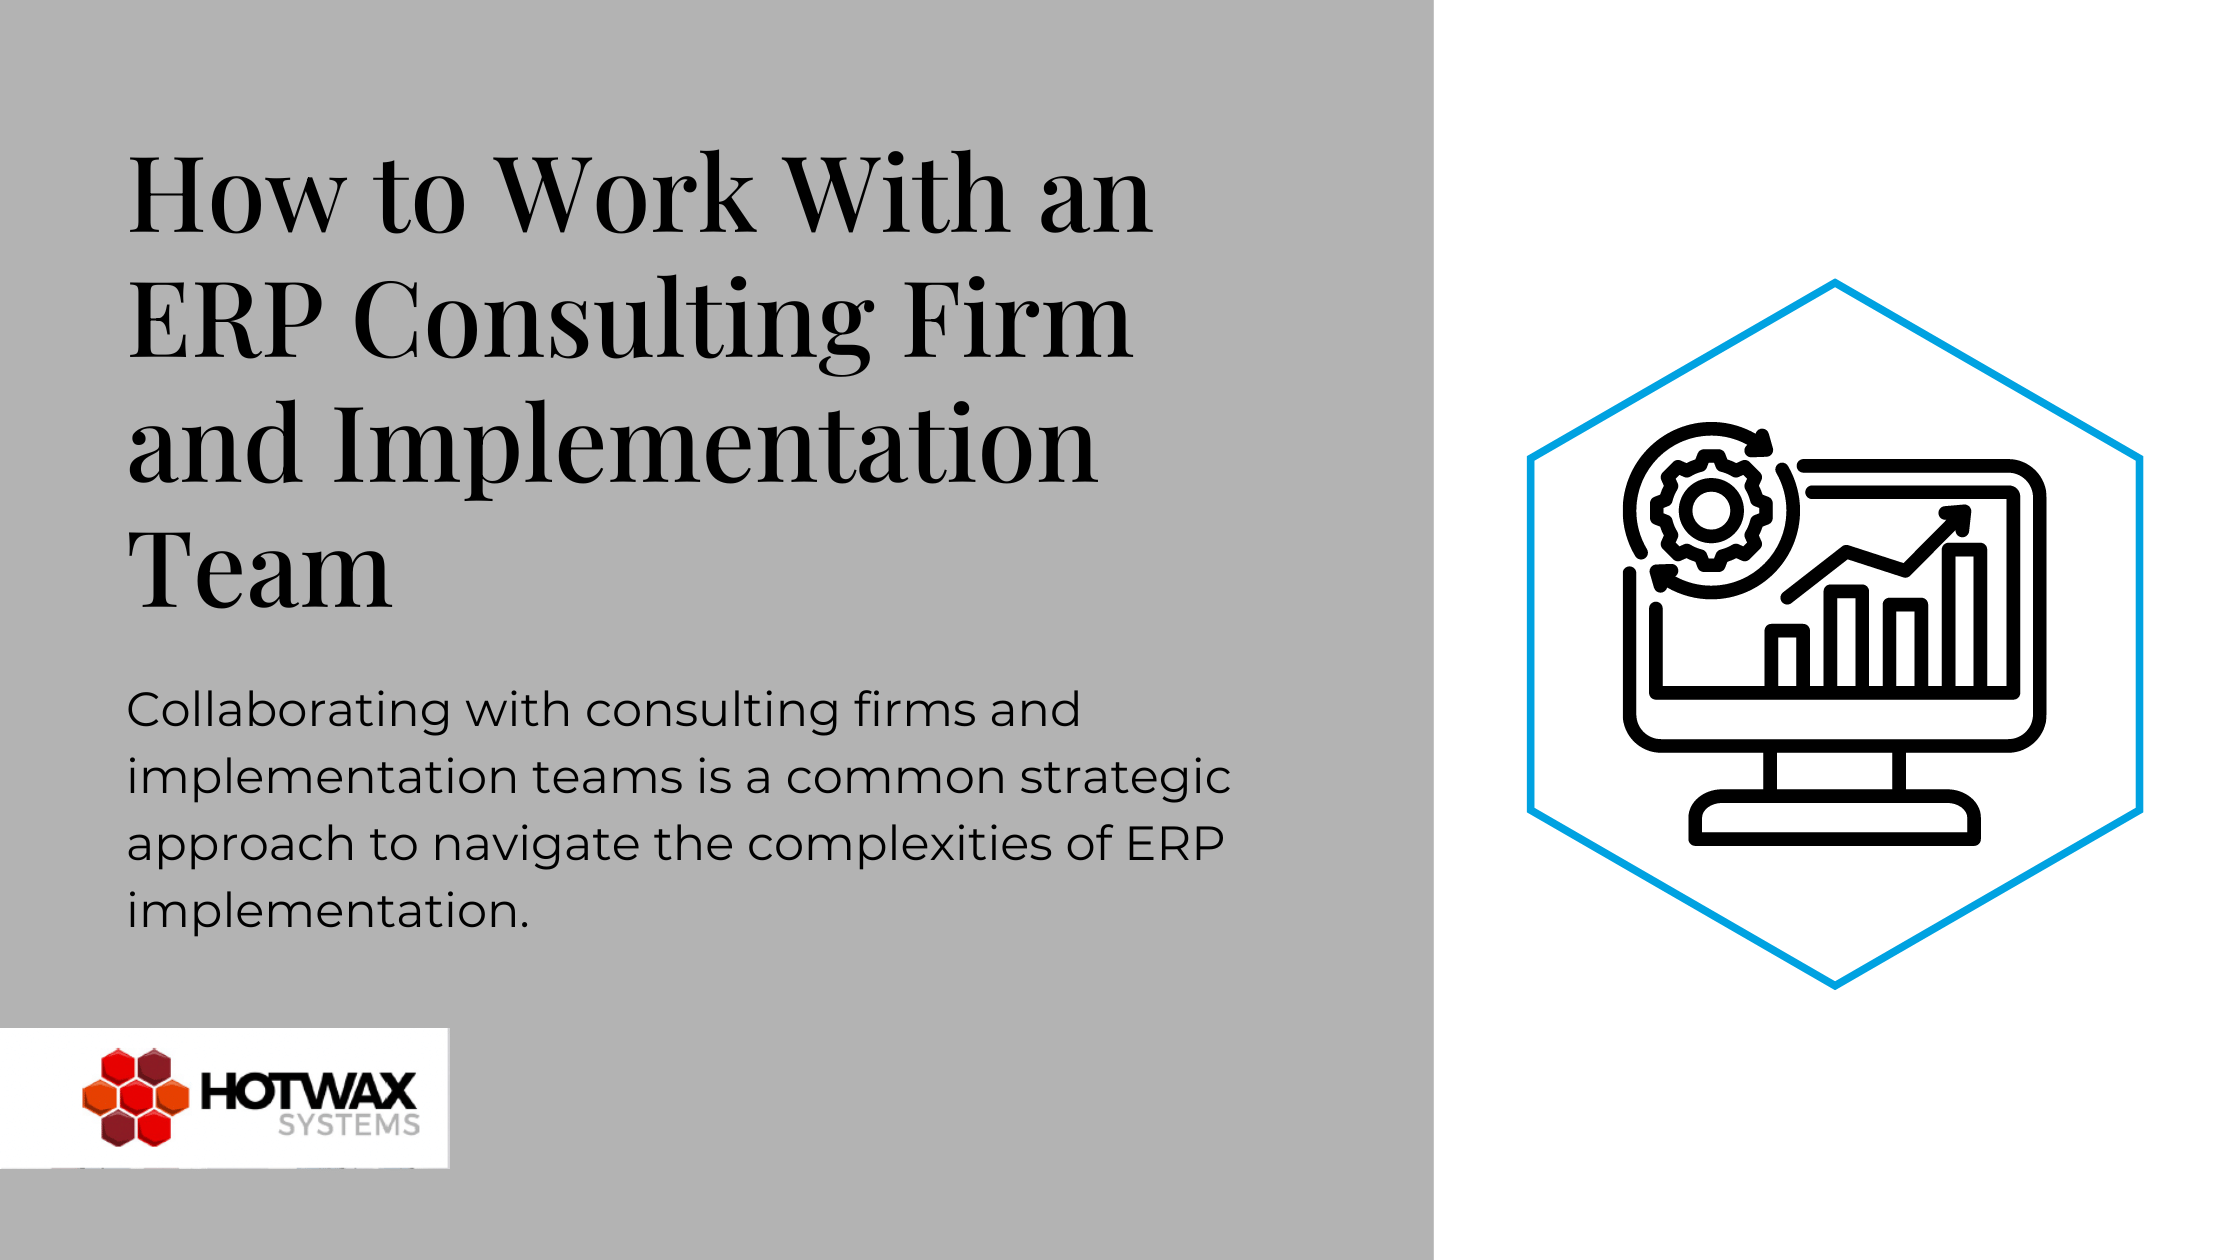 How to Work With an ERP Consulting Firm and Implementation Team